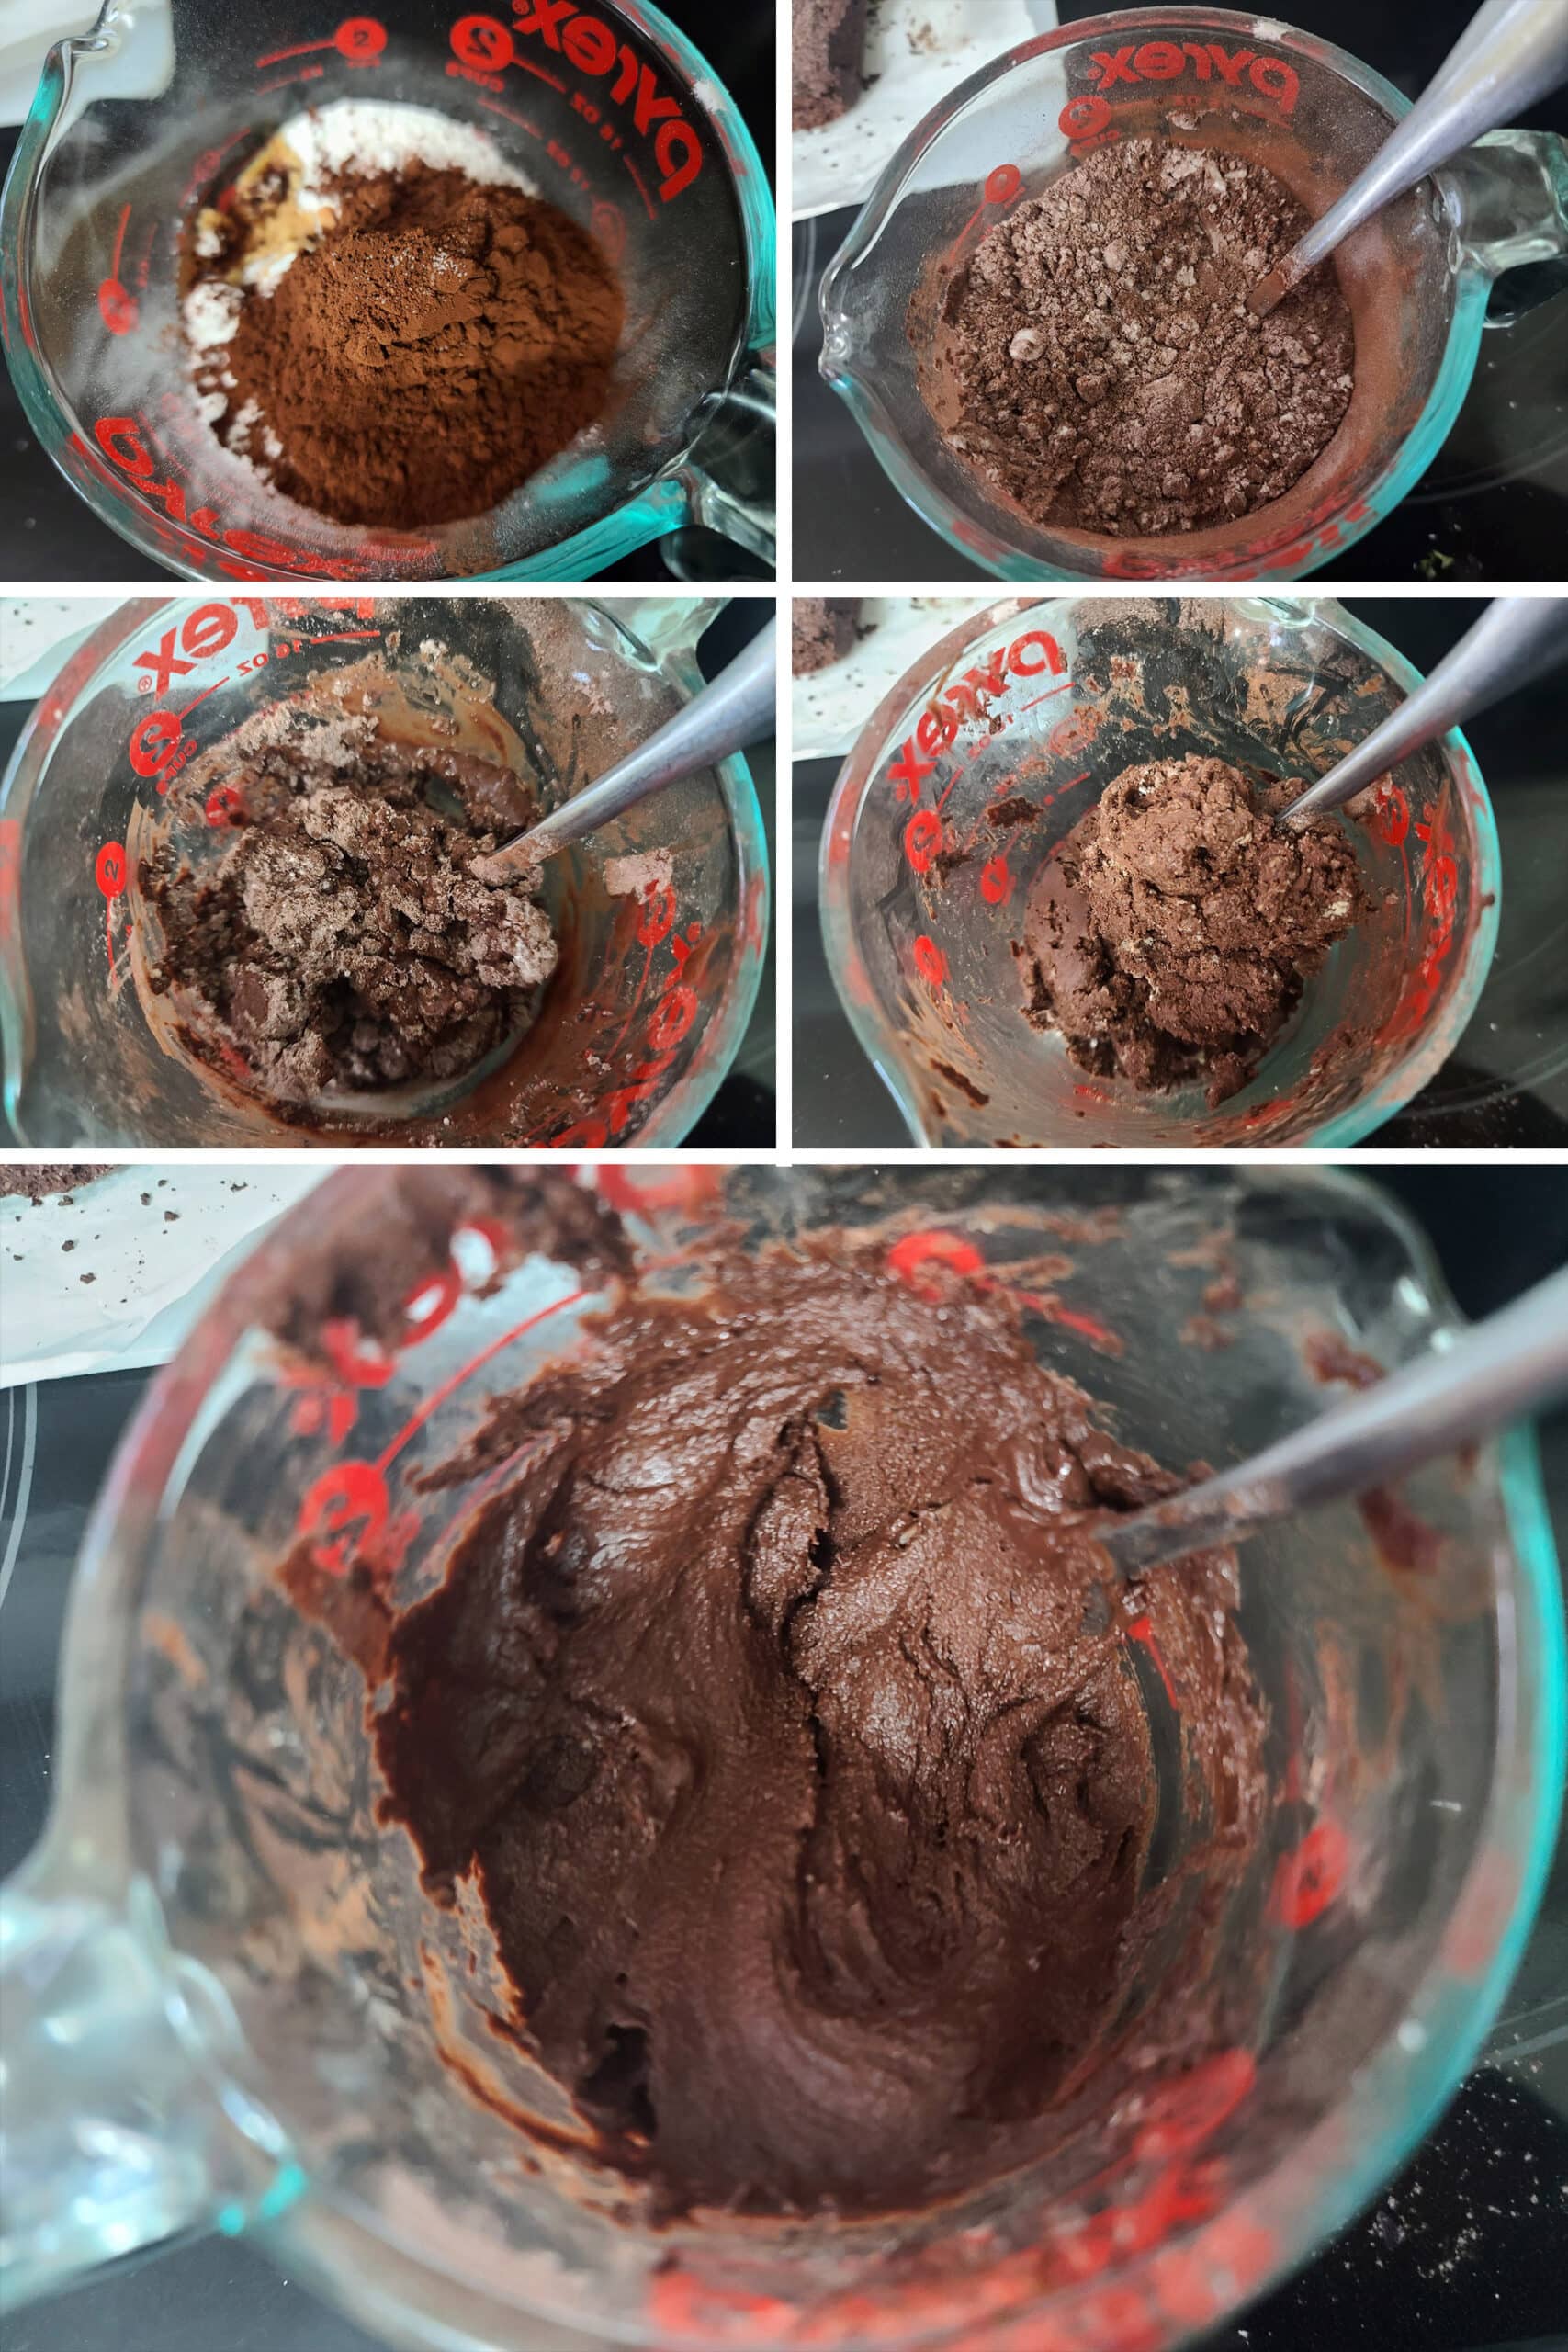 A 5 part image showing the keto chocolate frosting being mixed in a glass measuring cup.